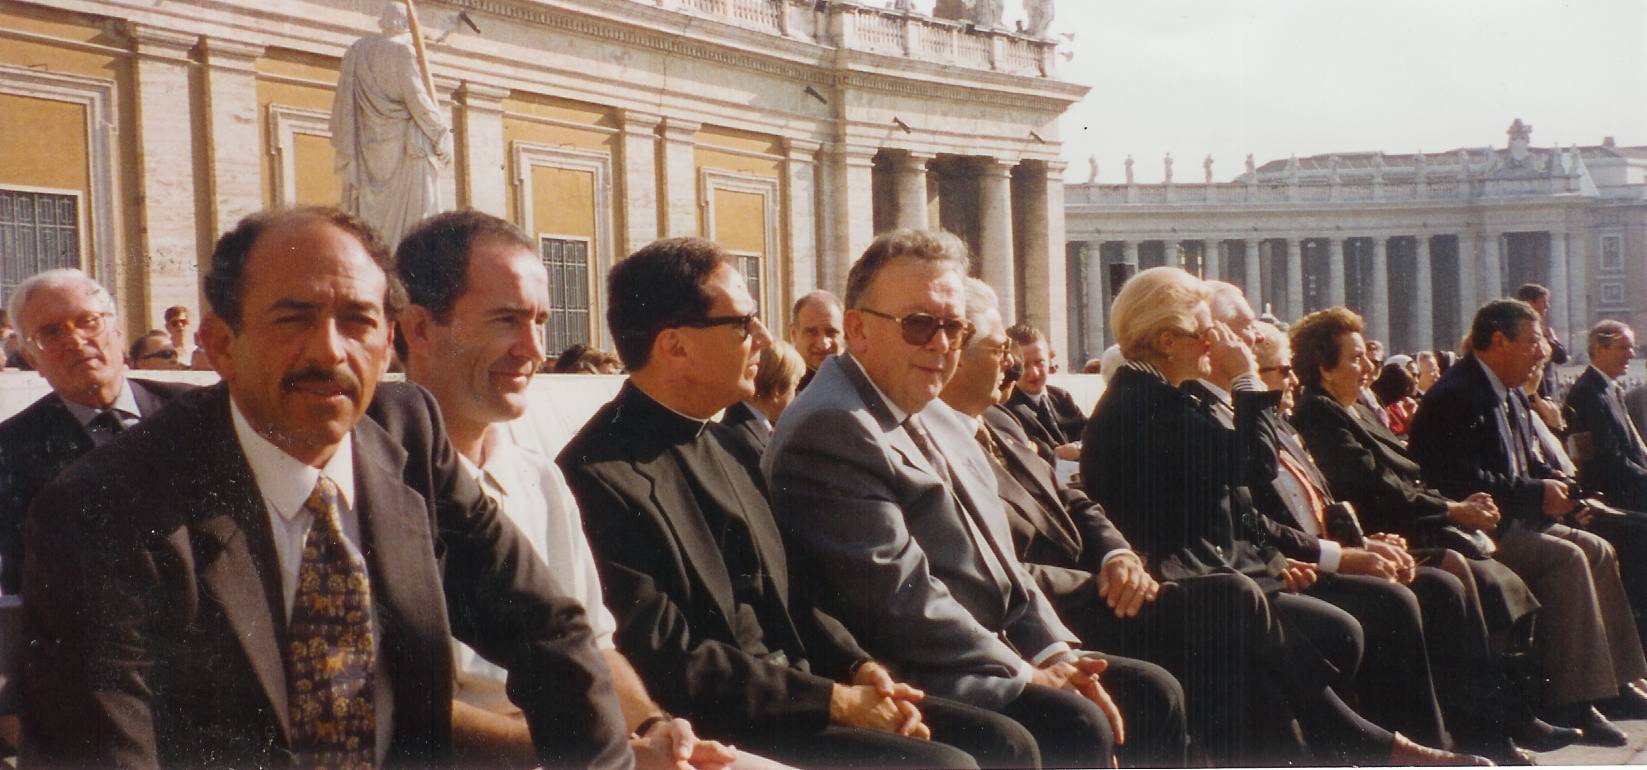 Dr. Jack Shepard before his Papal Blessing his Middle East Peace initiatives